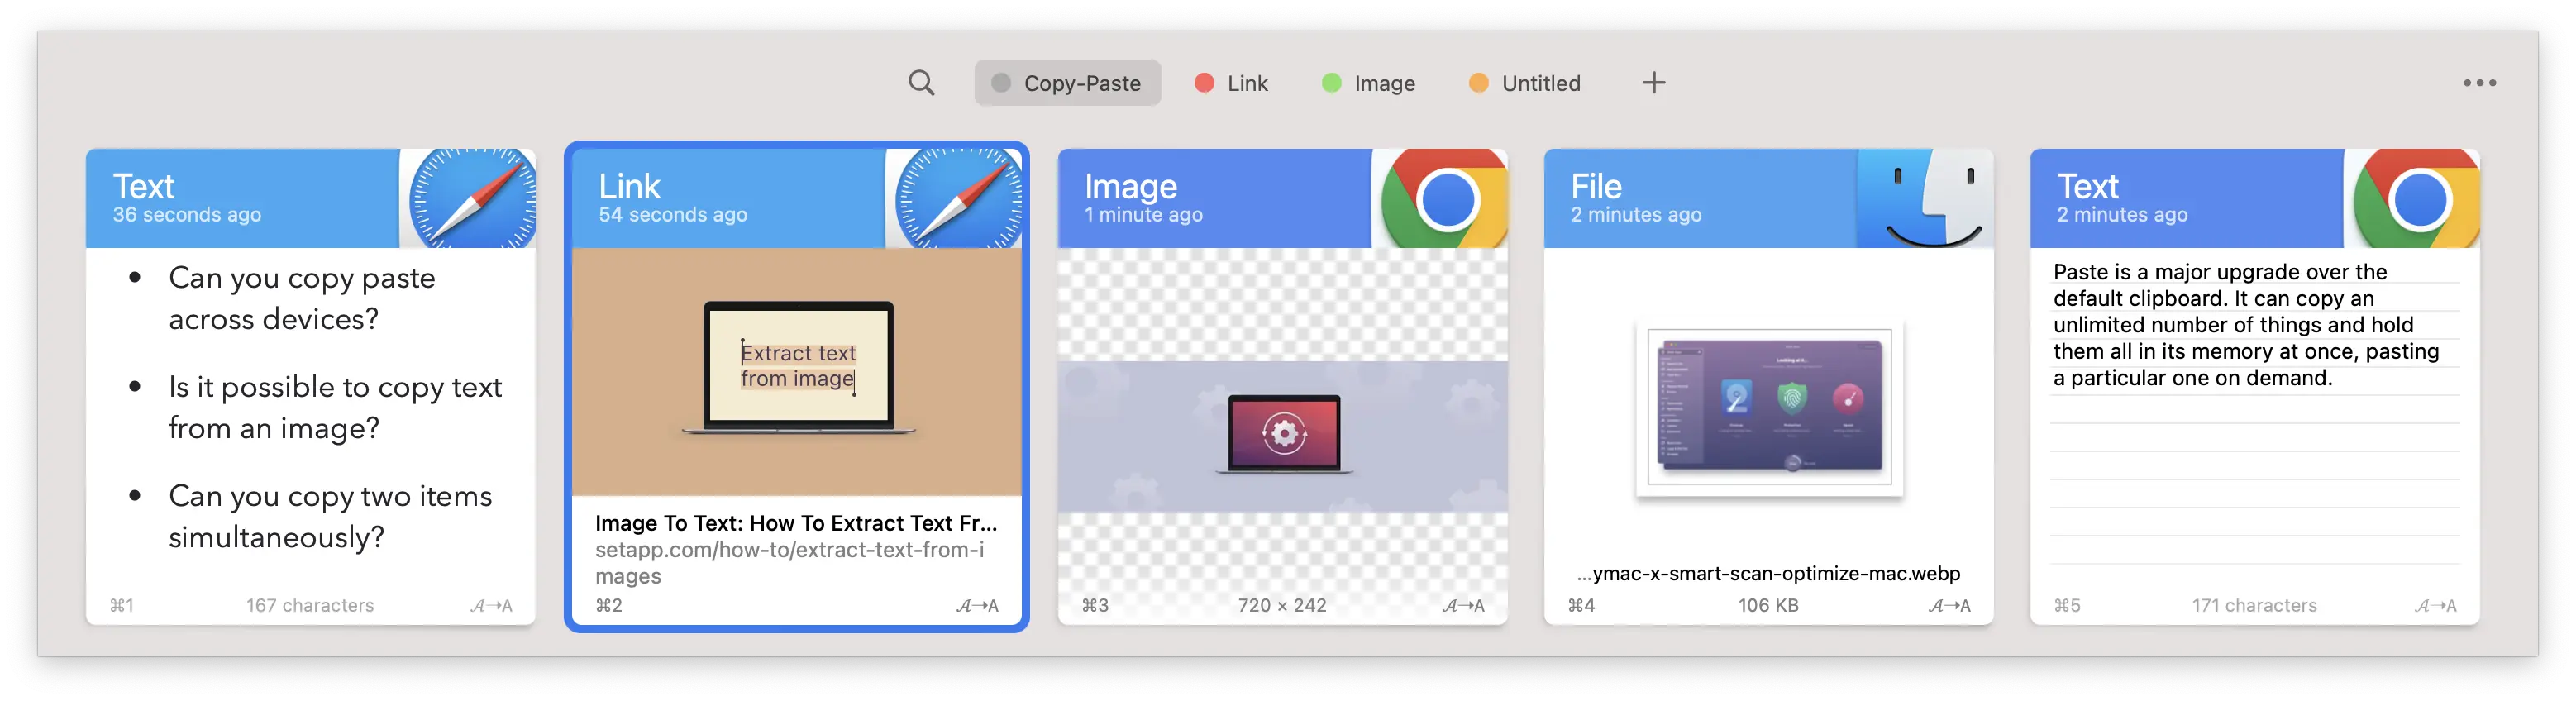 Paste, an alternative clipboard for Mac, iPhone, and iPad